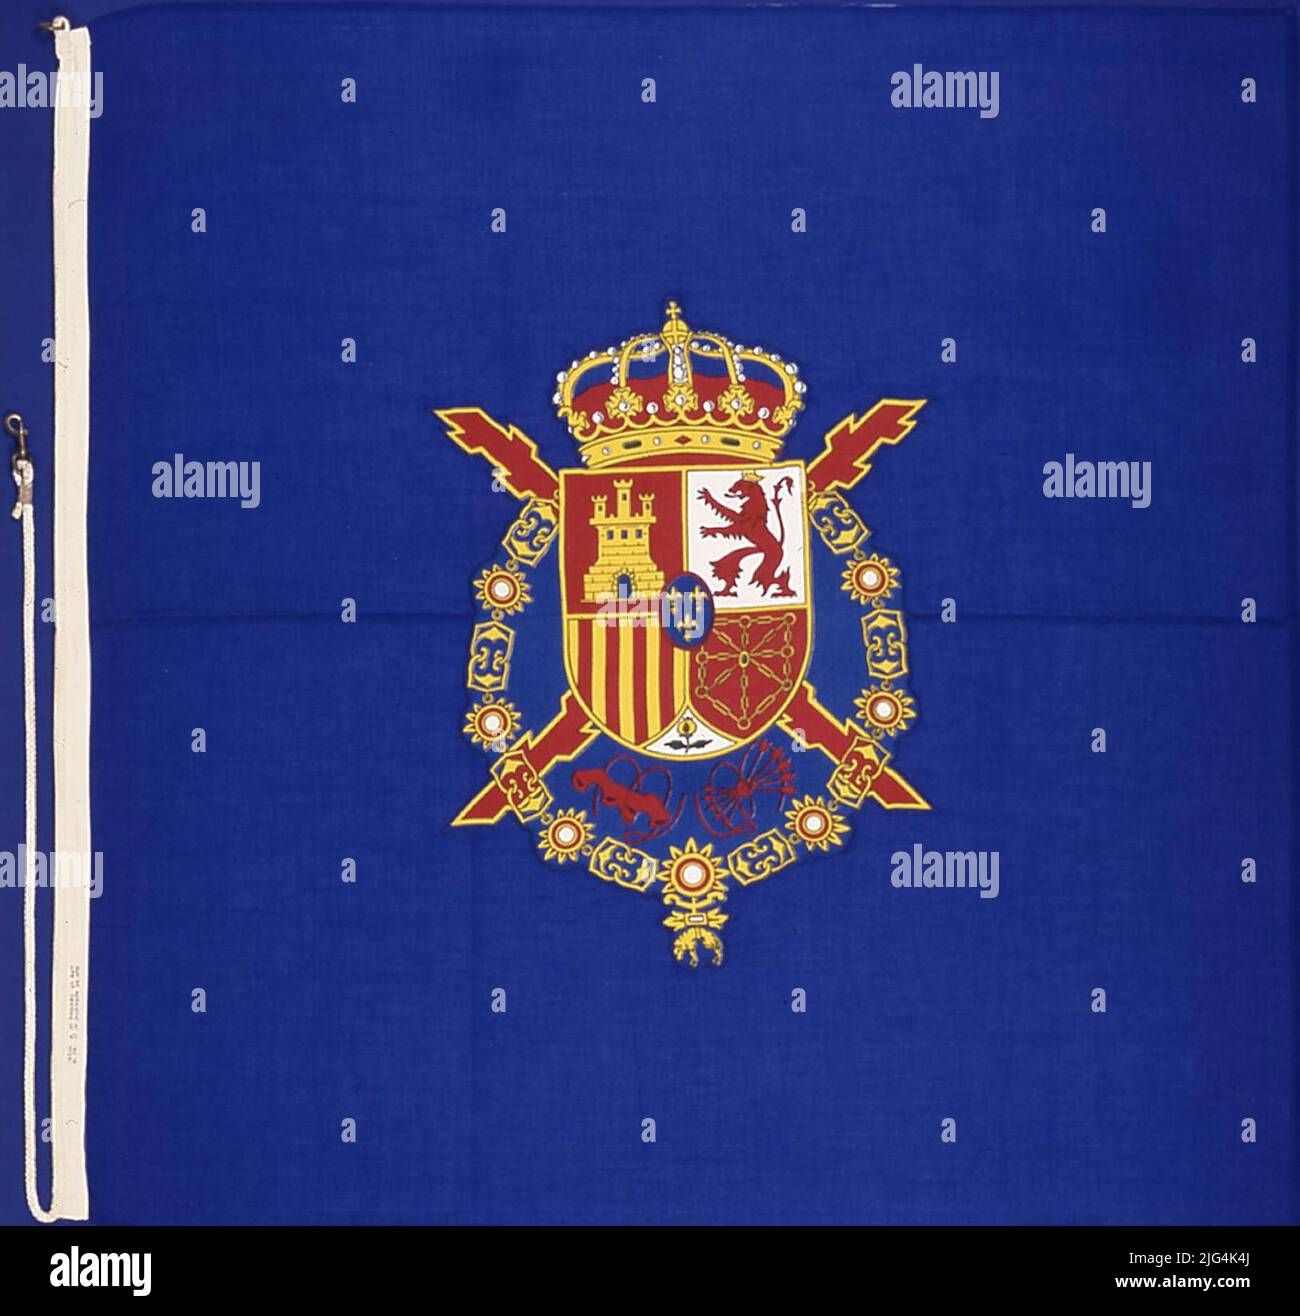 Royal S.M. King Juan Carlos I. banner. Go on December 11, 1991 at the Prince of Asturias aircraft carrier during a navigation with S.M. The king aboard. She entered the Naval Museum on 8-1-1997 with a blue background, in the center it has a quarter shield of the blazons of Castilla, León, Aragón, Navarra and, bound in Punta, Granada. In El Escusón, three lis flowers of Bourbon's house. Acolada to the shield, the Red Cross of Burgundy, and to the left and right of the tip of the shield, the yoke in its natural position and the beam of five arrows with tips down. All surrounded by the gold toiso Stock Photo